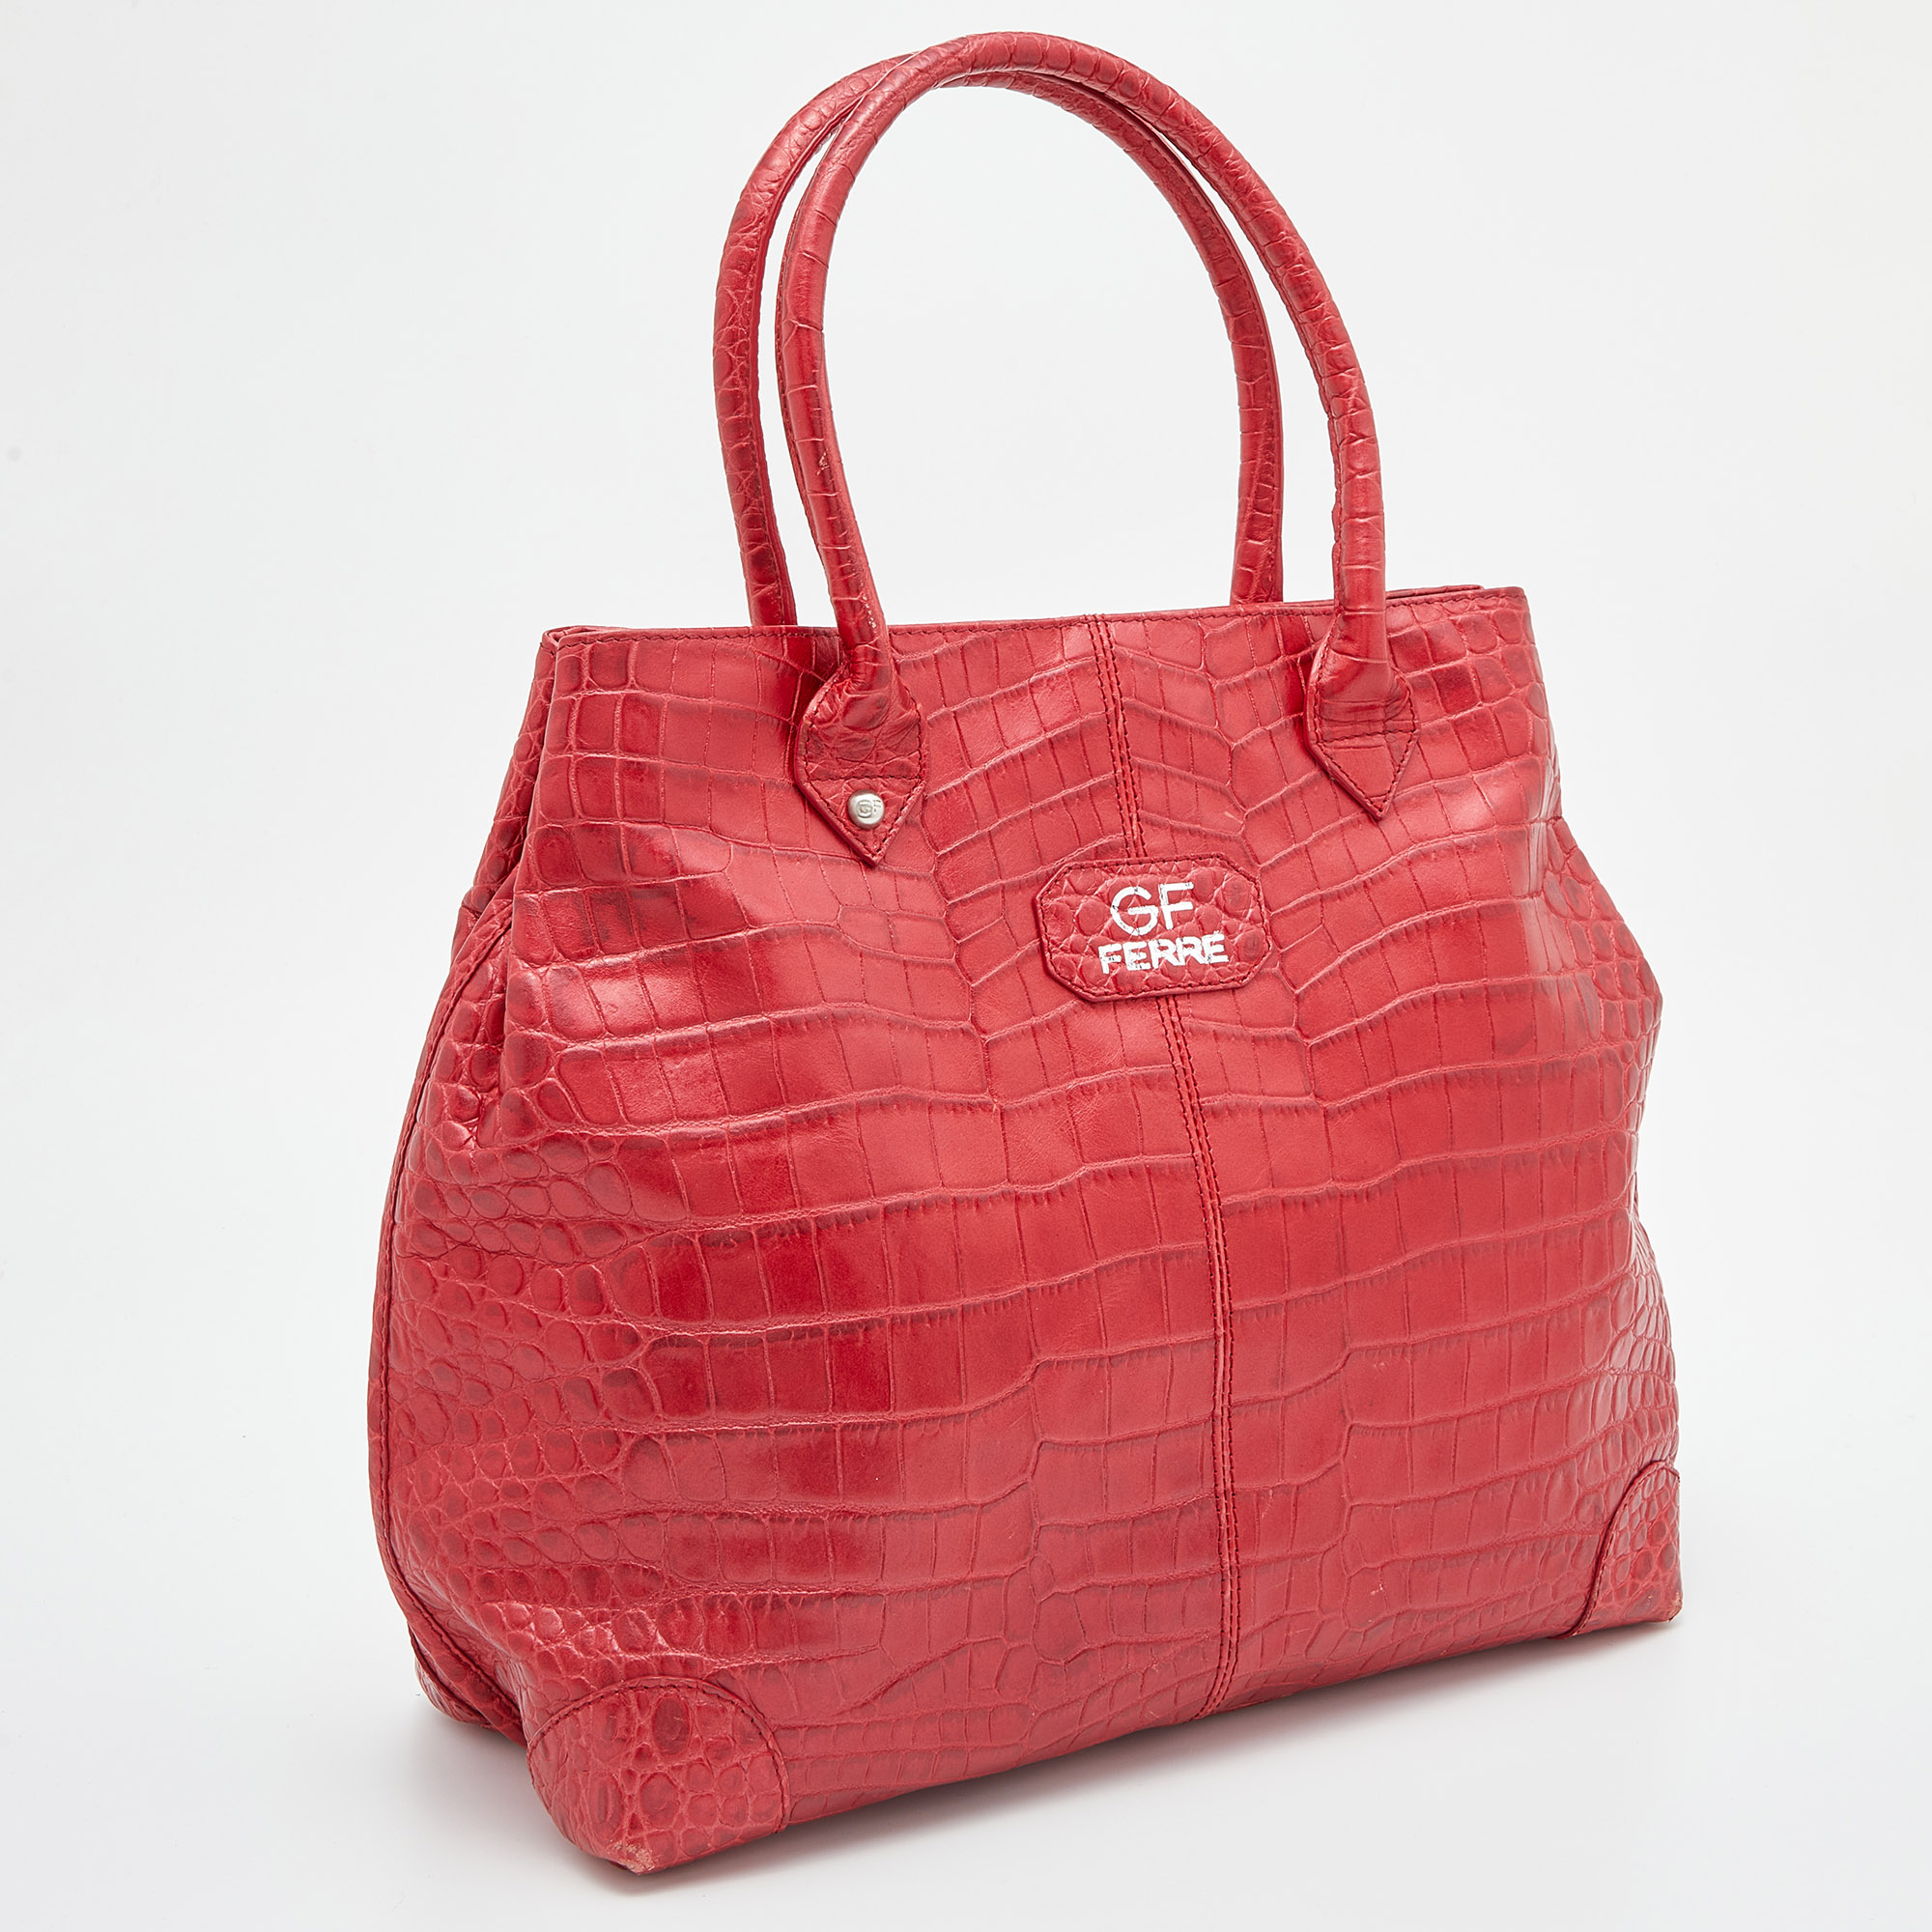 Gianfranco Ferre Red Croc Embossed Leather Tote